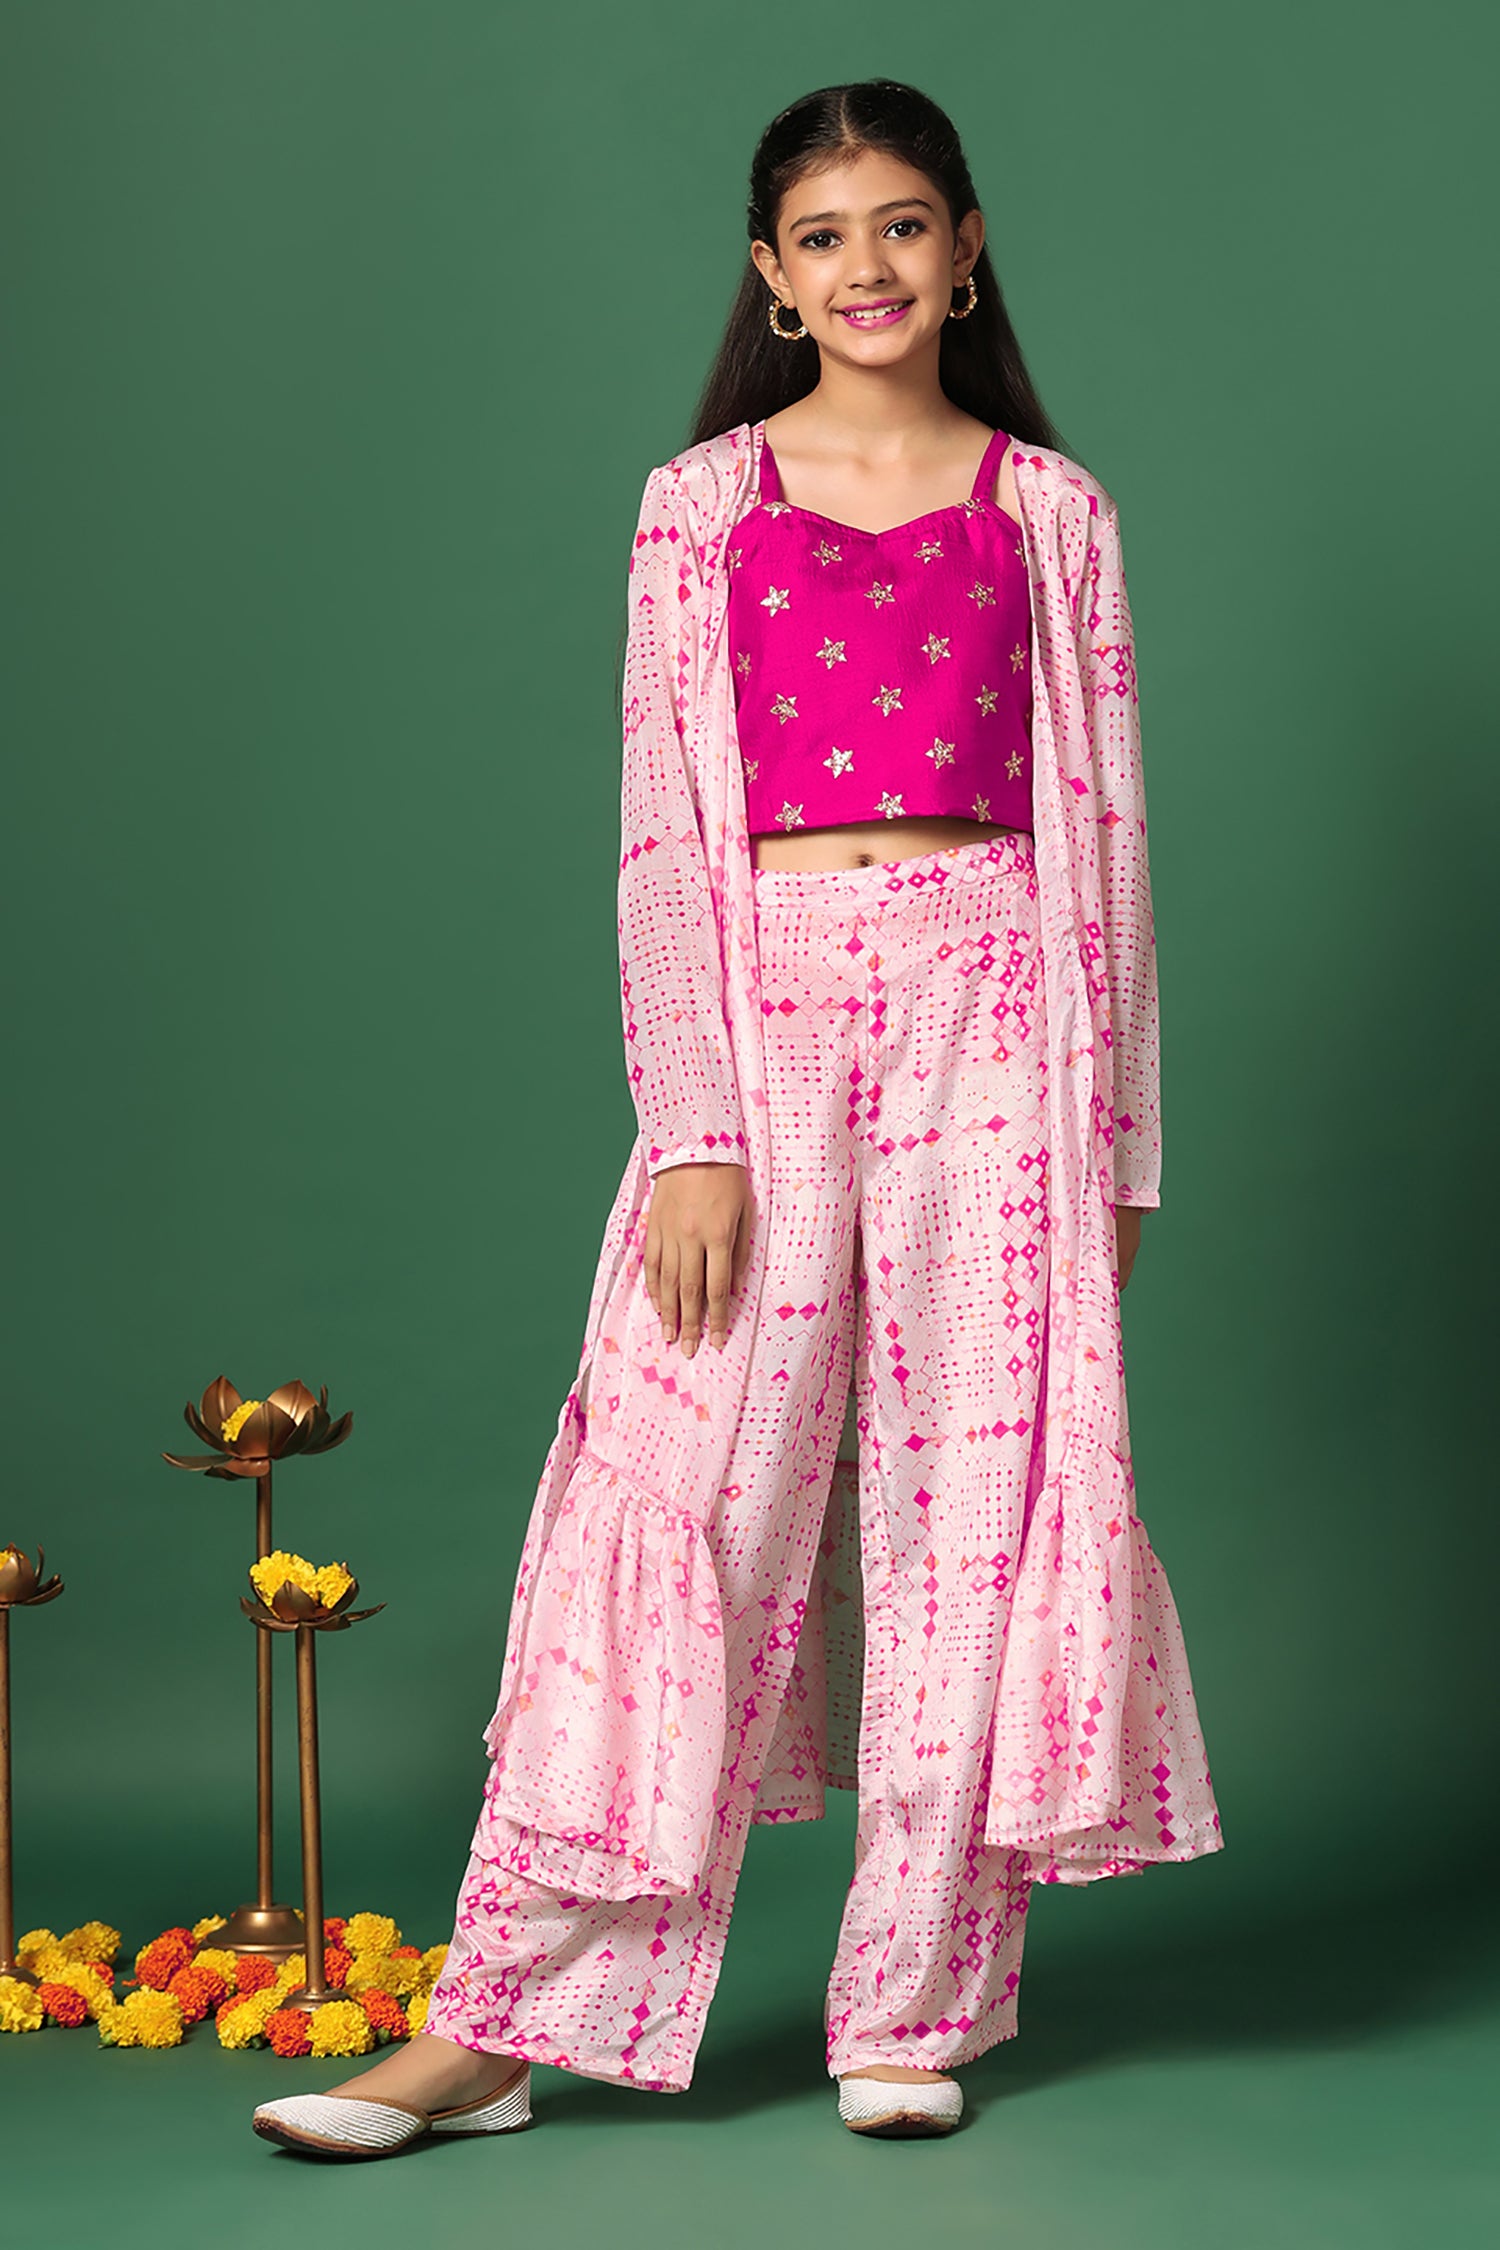 YELLOW & PINK DESIGNER PRINTED SILK SHRUG KOTI WITH TOP AND PALAZZO CO-ORDS  INDO WESTERN SUIT - SHUBHKALA - 4138675